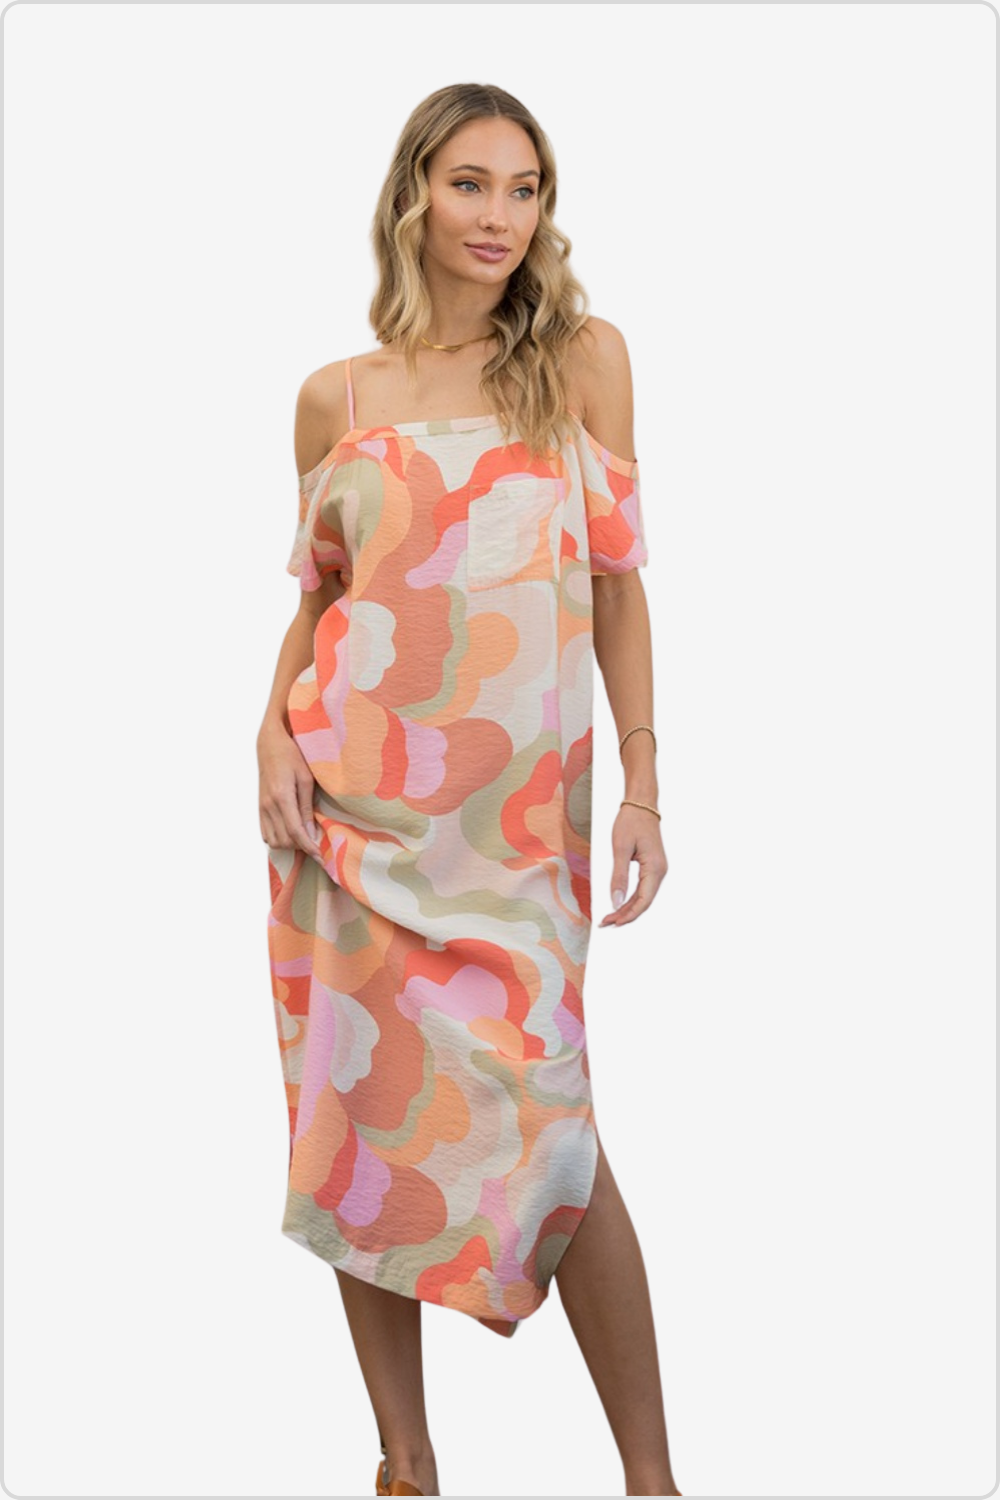 Stylish printed midi dress with an elegant side slit, front view